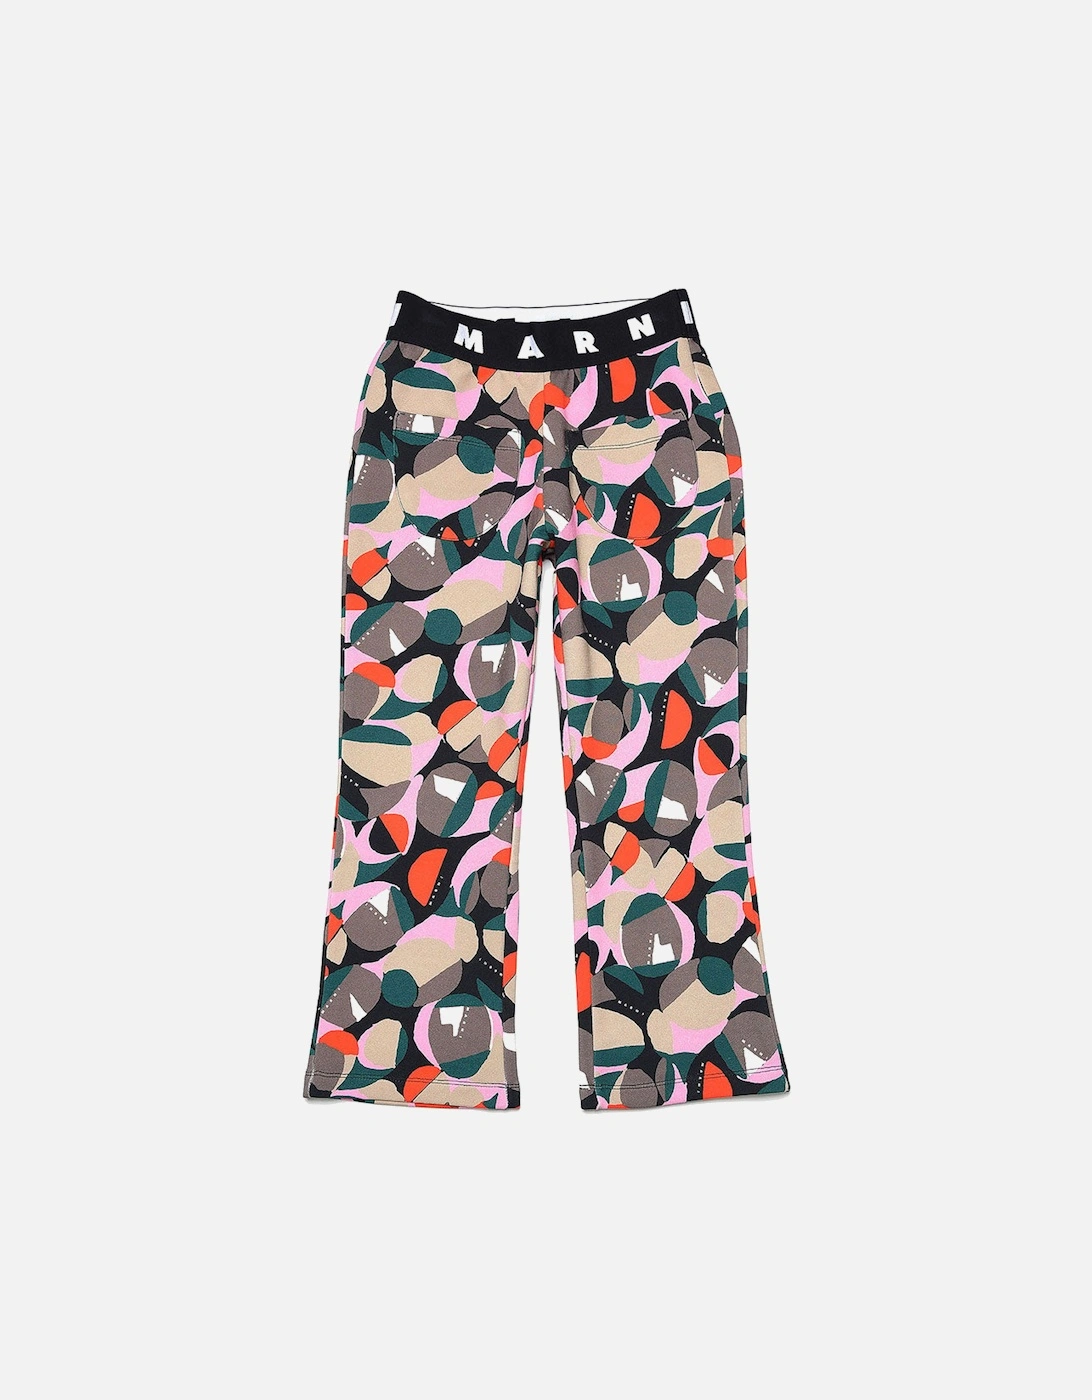 Girls Fleece Pants With All-Over Abstract Print Black